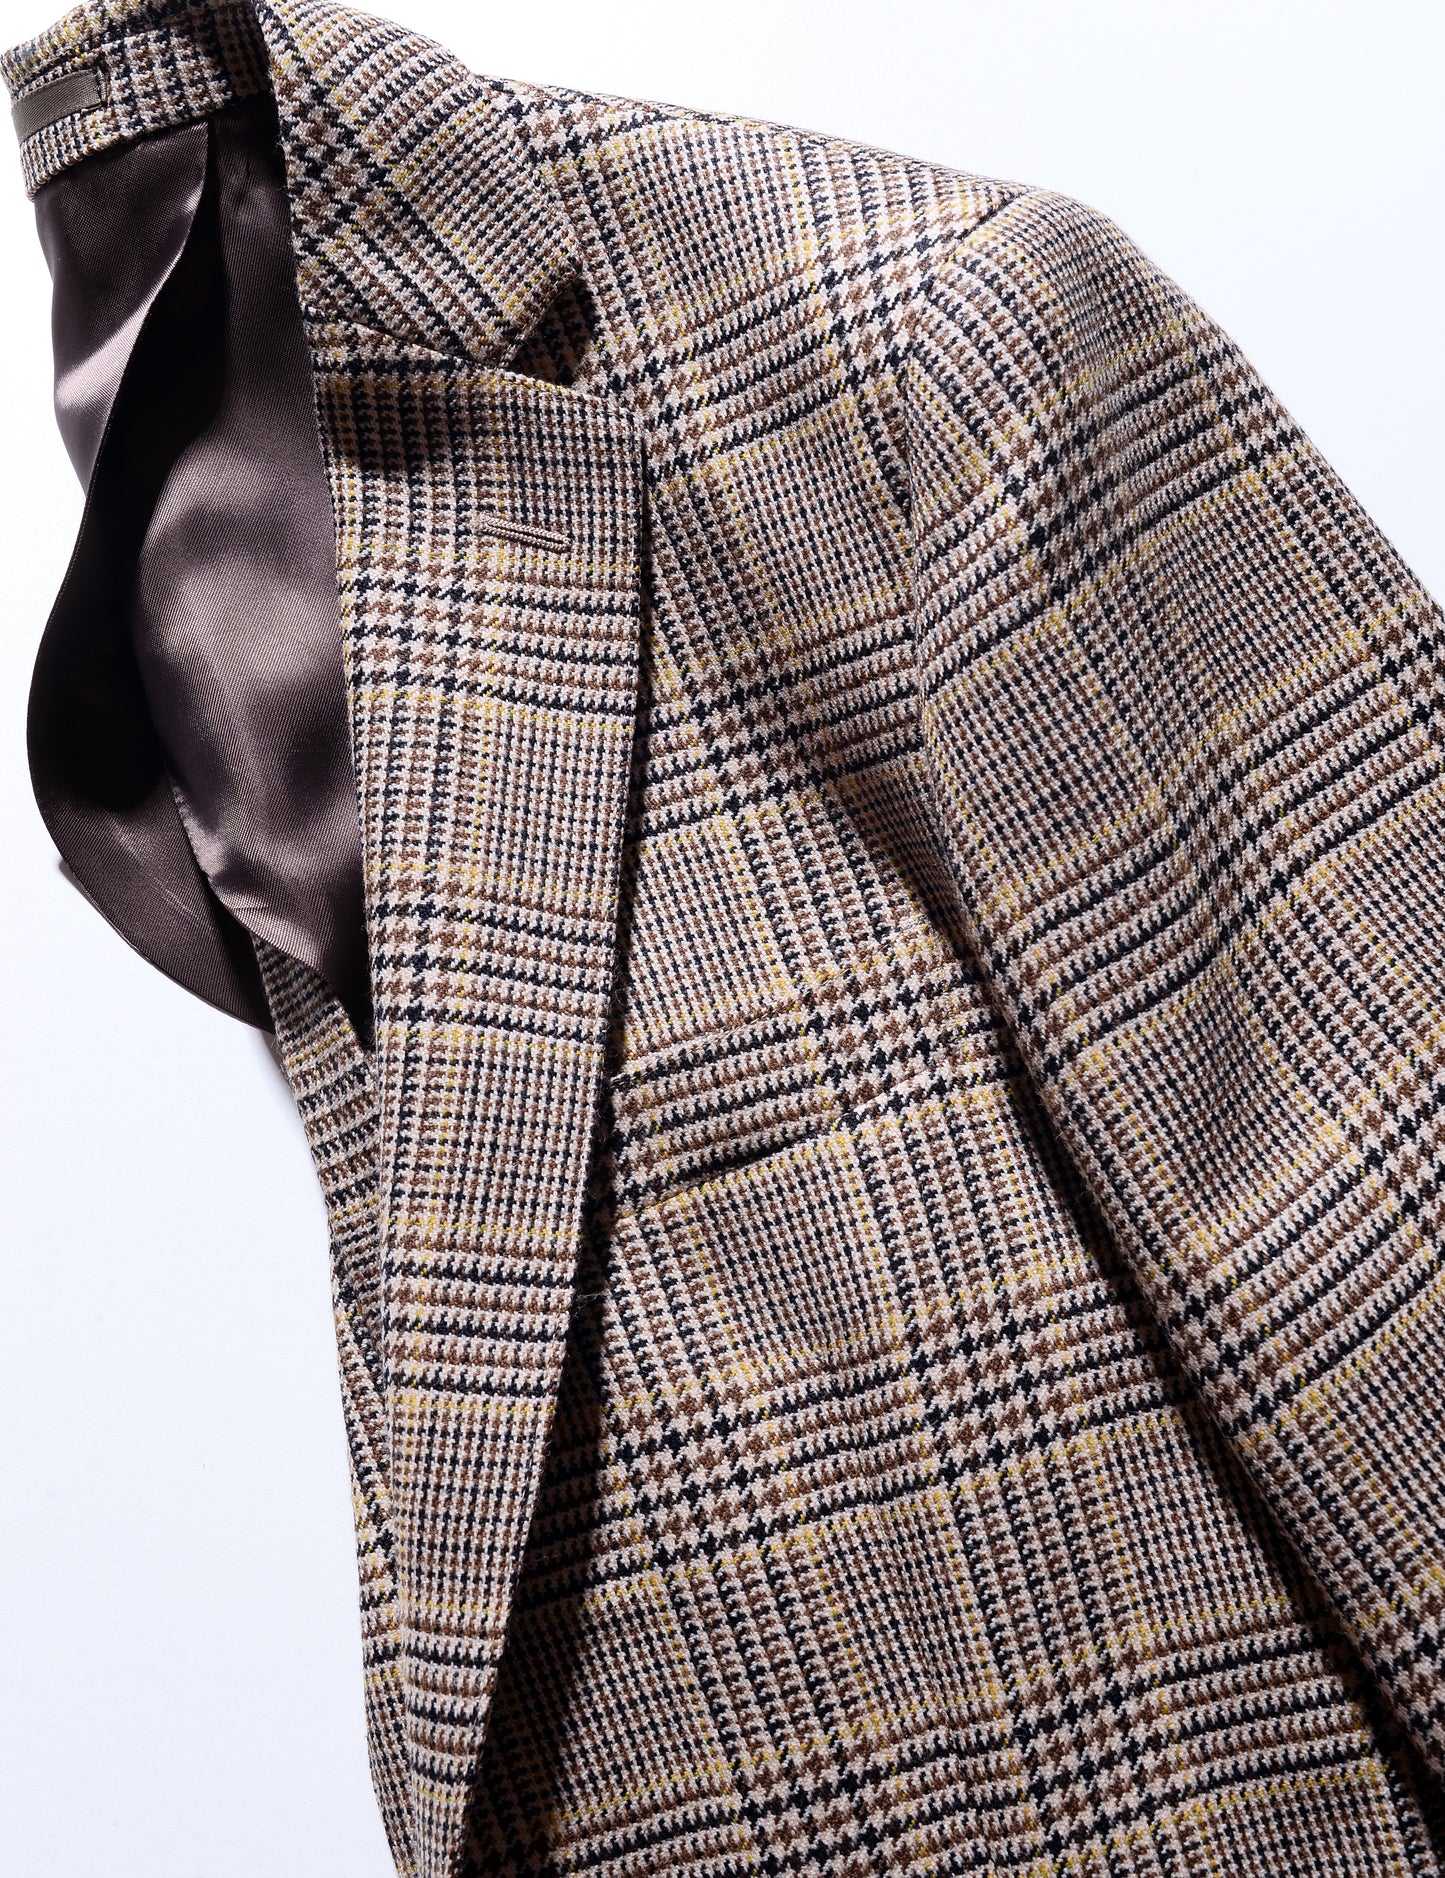 Detail shot showing lapel, half-lining, and fabric pattern on Brooklyn Tailors BKT35 Unstructured Jacket in Vintage Wool - English Plaid